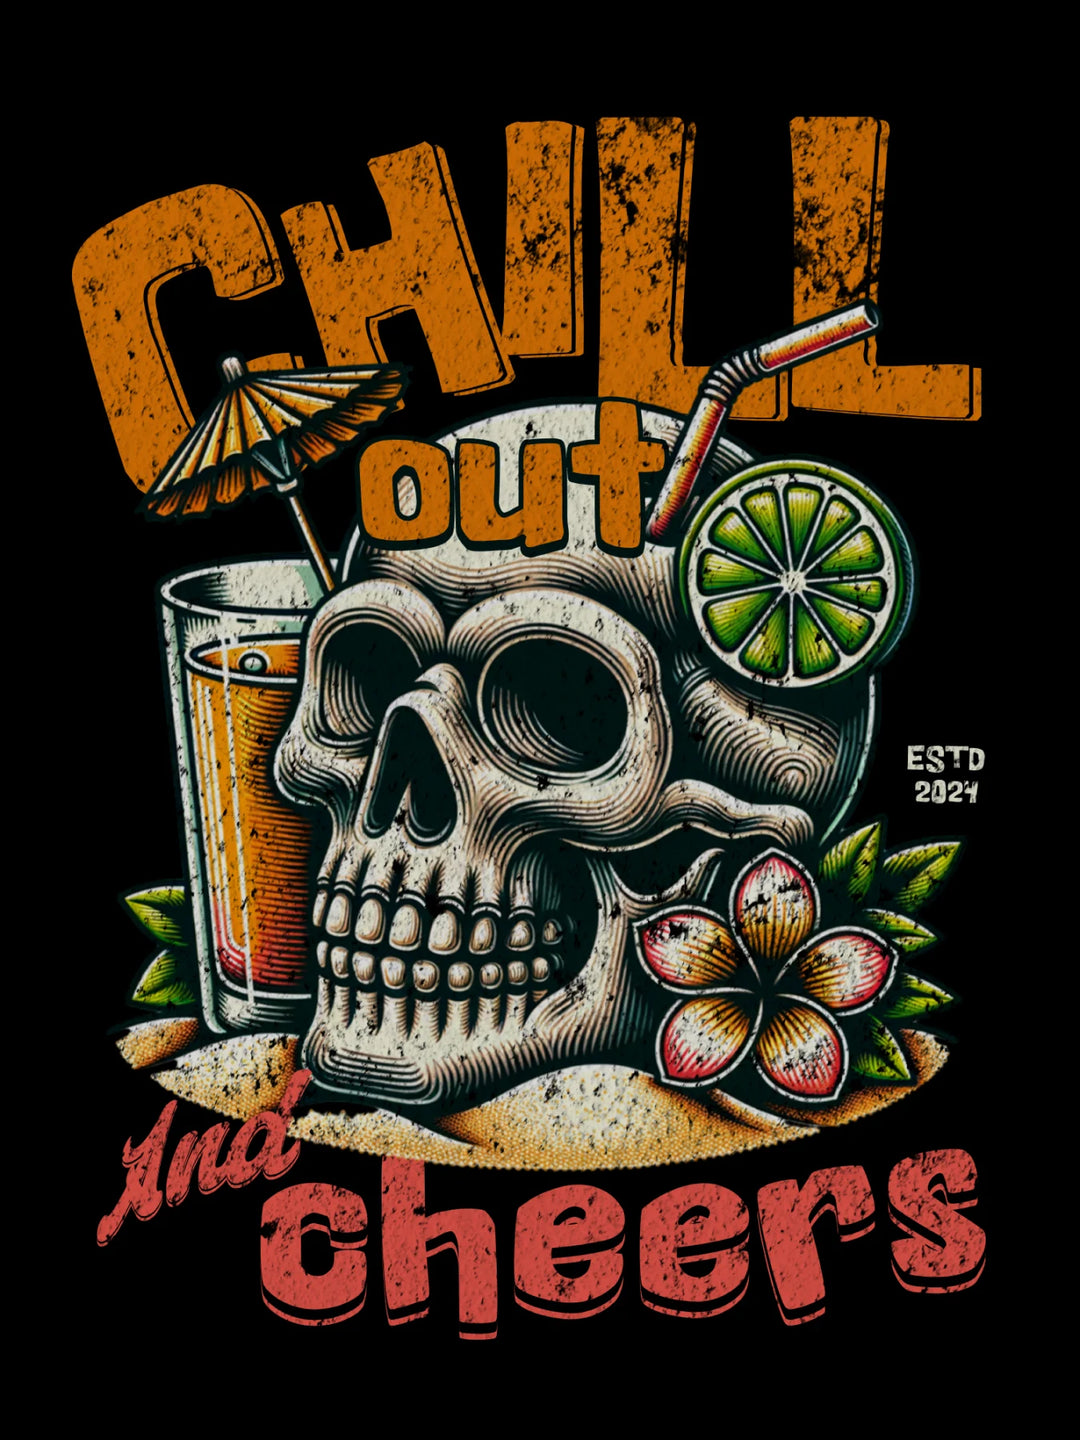 Chill Out Cheers - Unisex T-Shirt